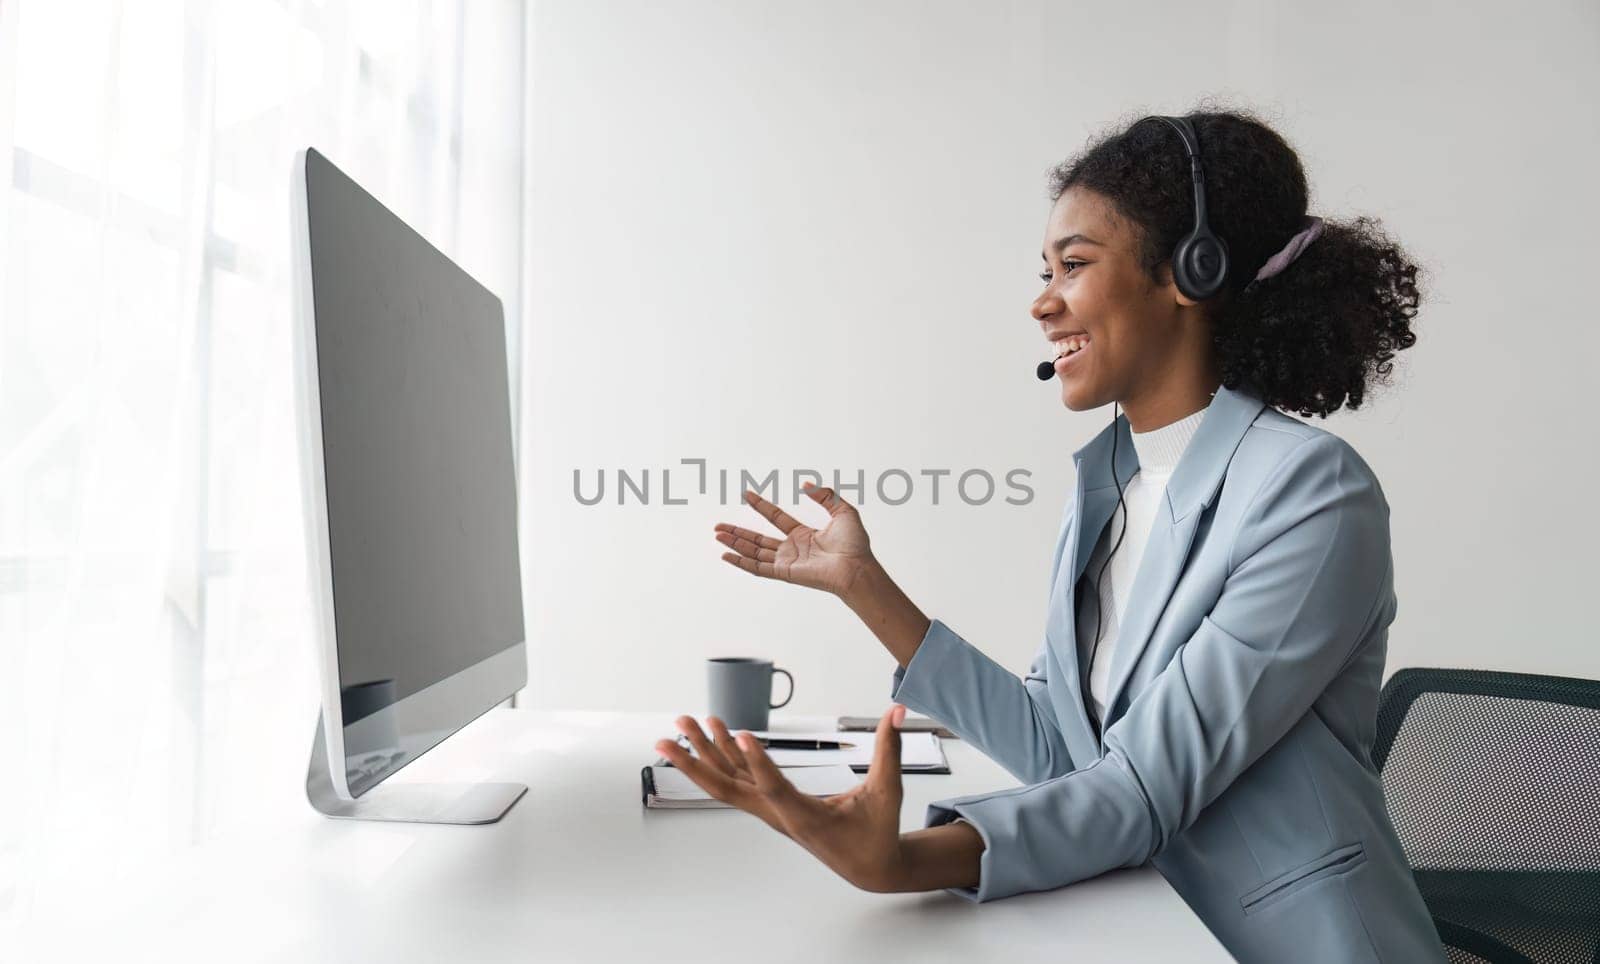 Portrait of happy smiling female customer support phone operator at workplace. Smiling beautiful African American woman working in call center.